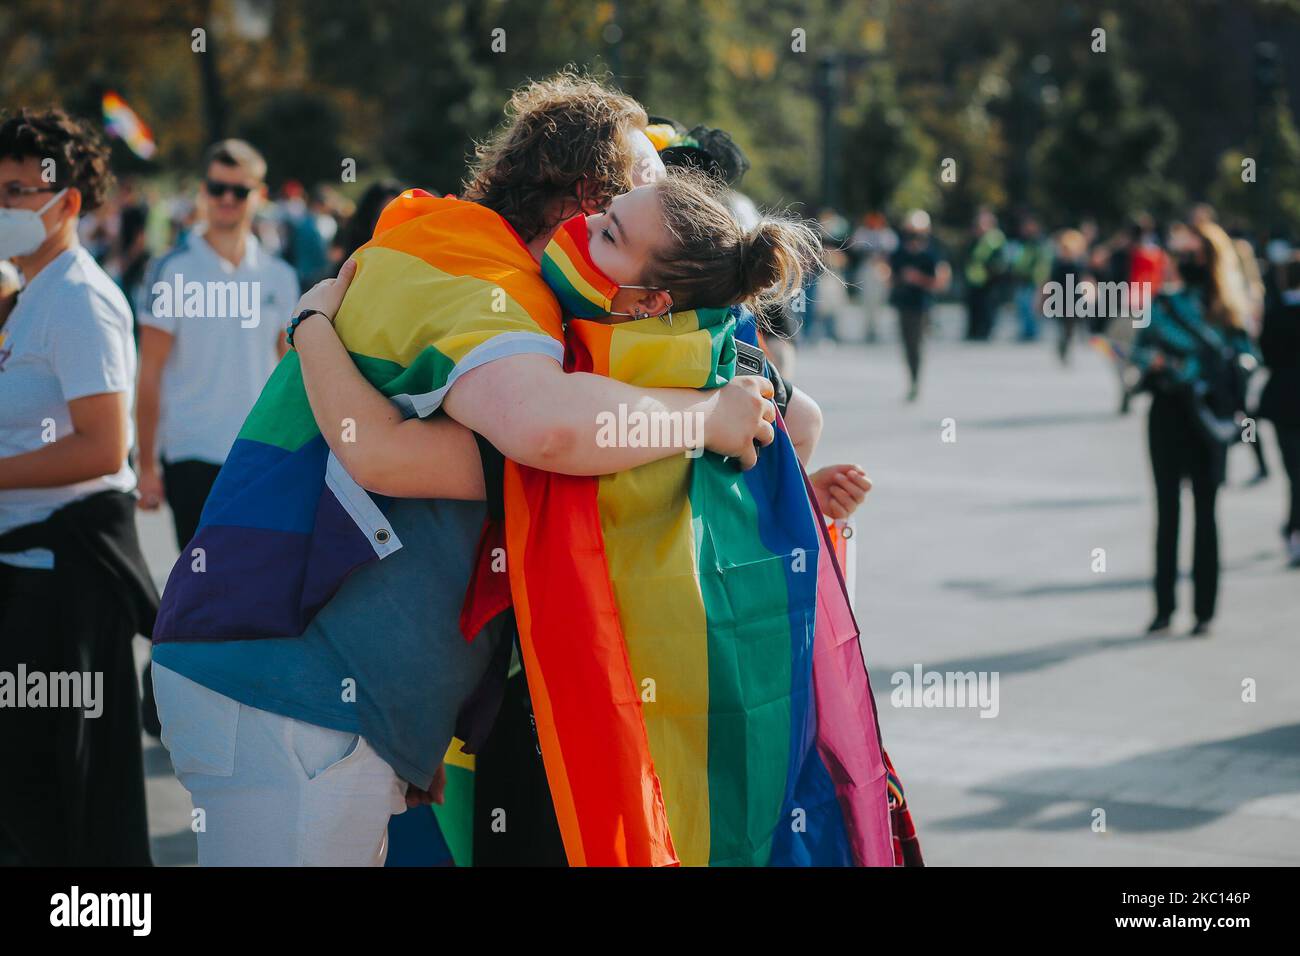 On October 3, 2020, the 12th Equality March was passed through the streets of Wroclaw. 10,000 people demonstrated their opposition to discrimination against people from the LGBT + community. (Photo by Krzysztof Zatycki/NurPhoto) Stock Photo